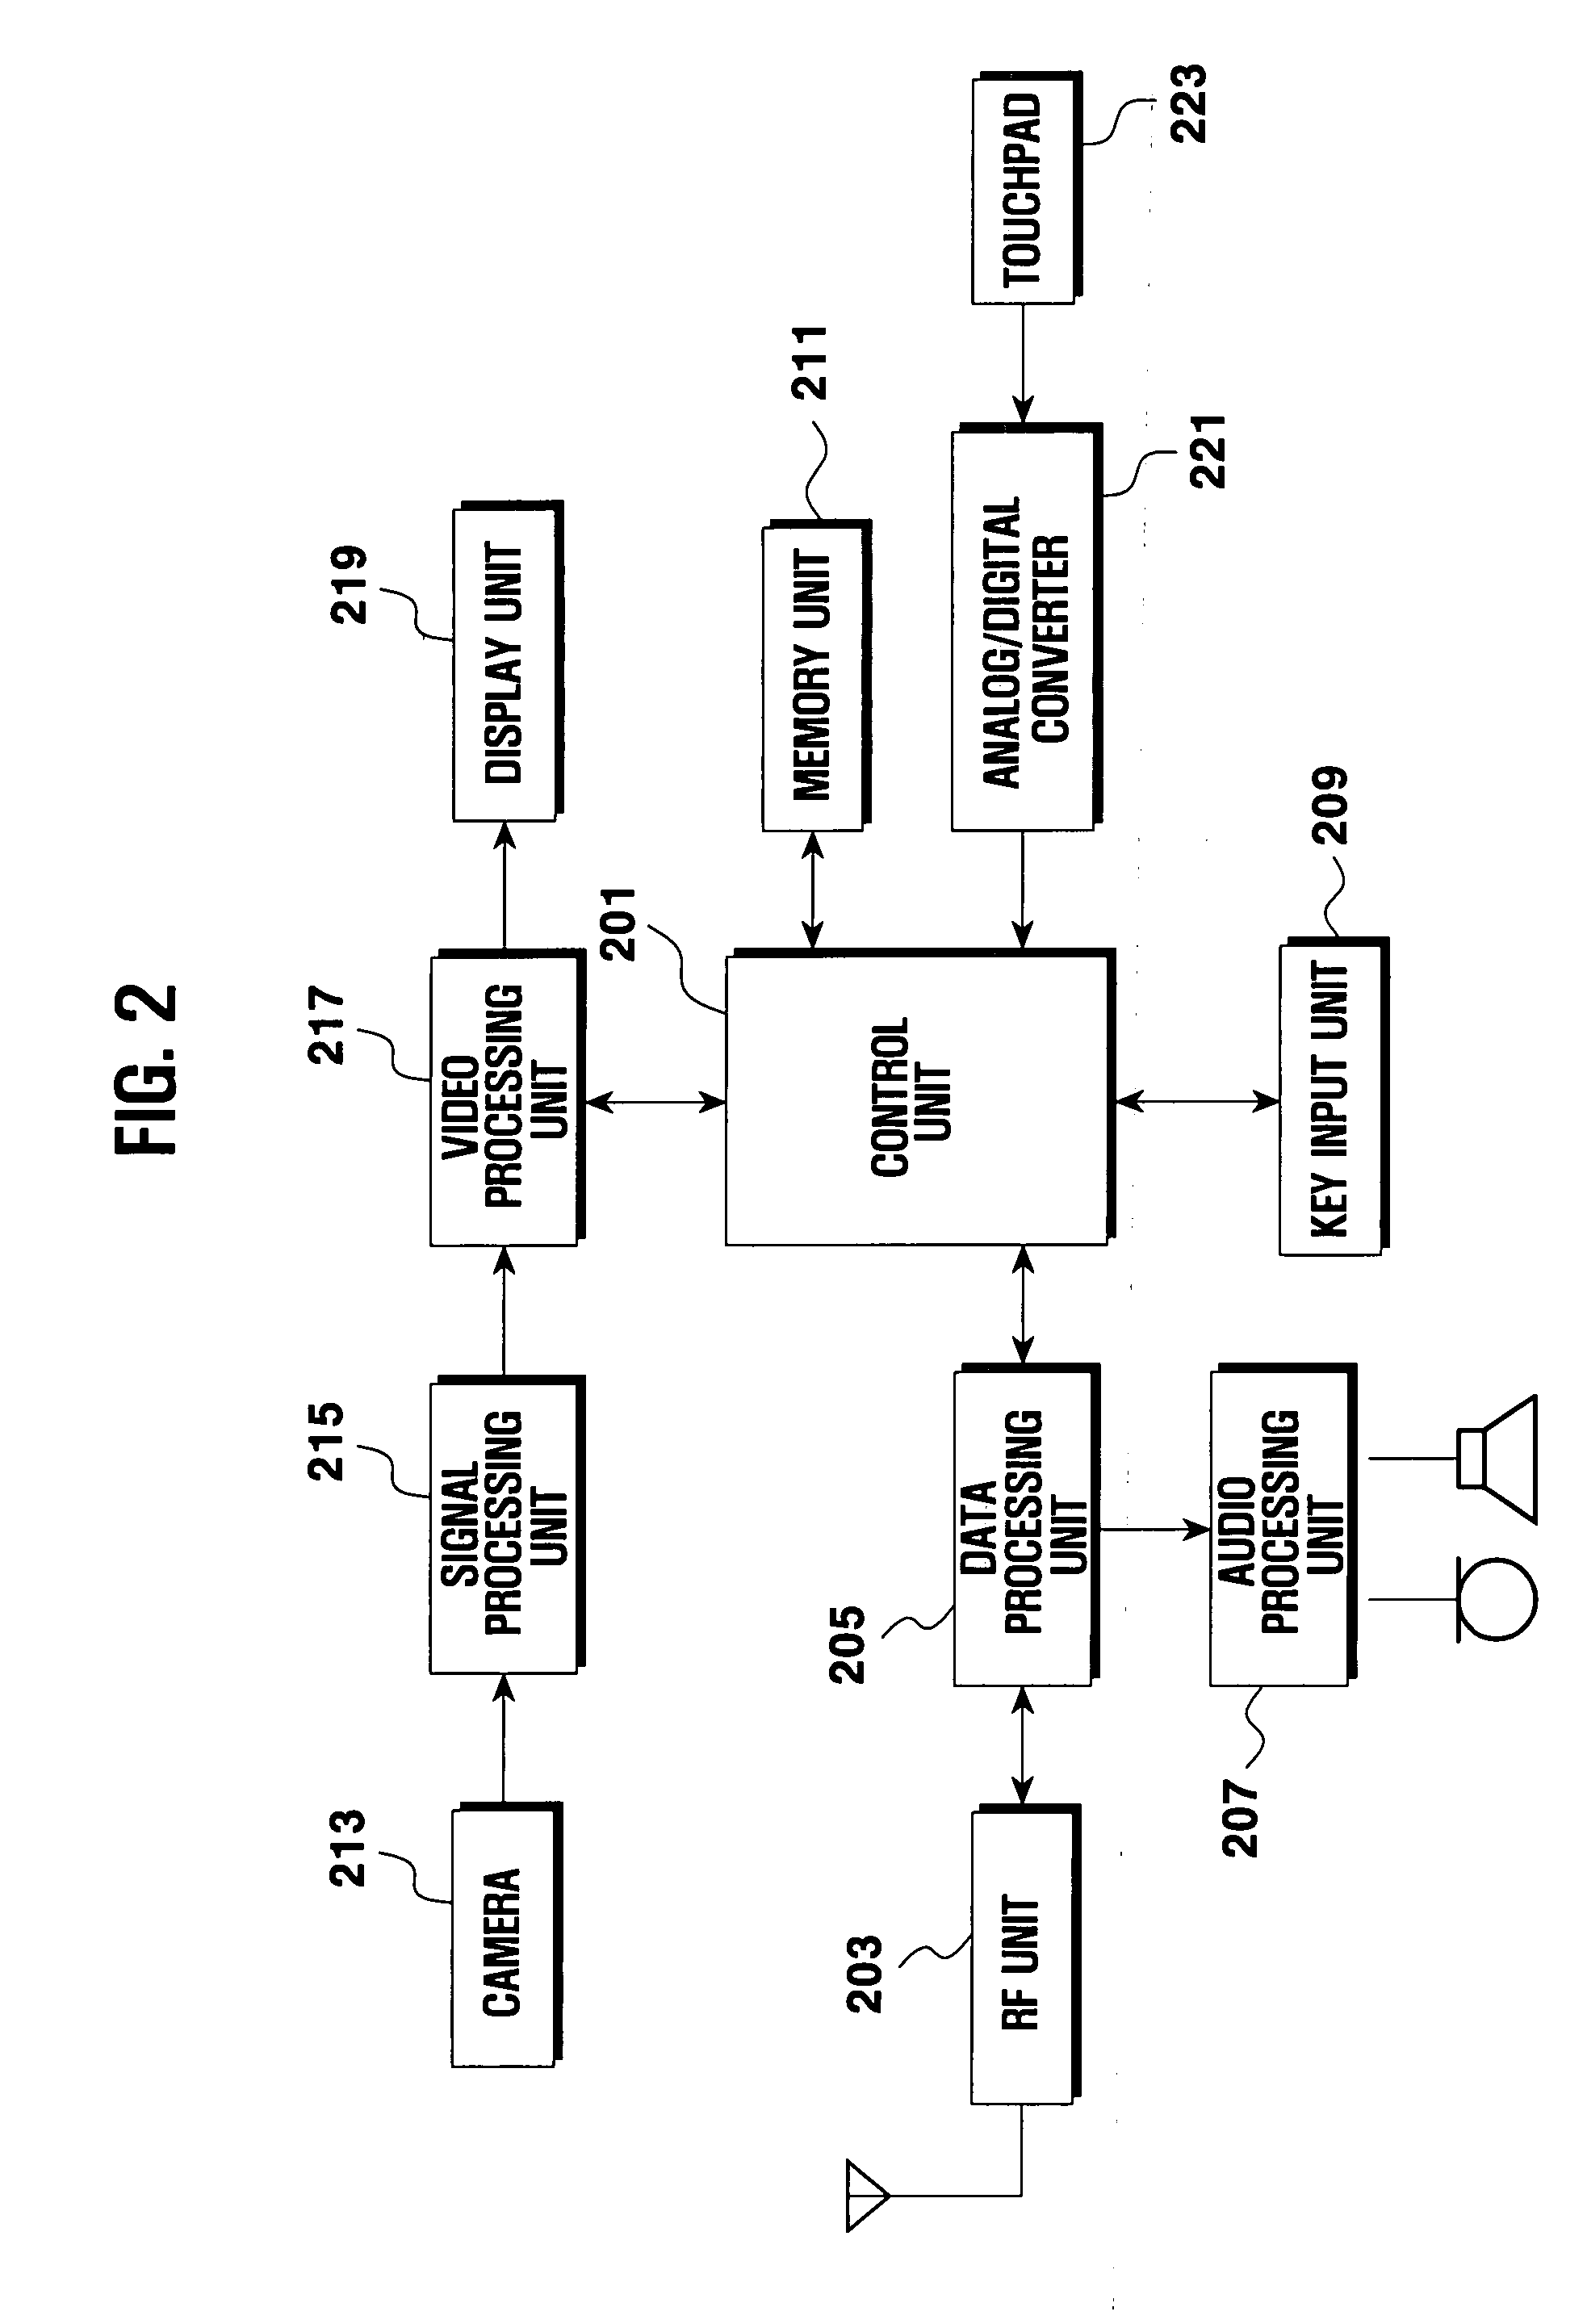 Touchpad-based input system and method for portable device